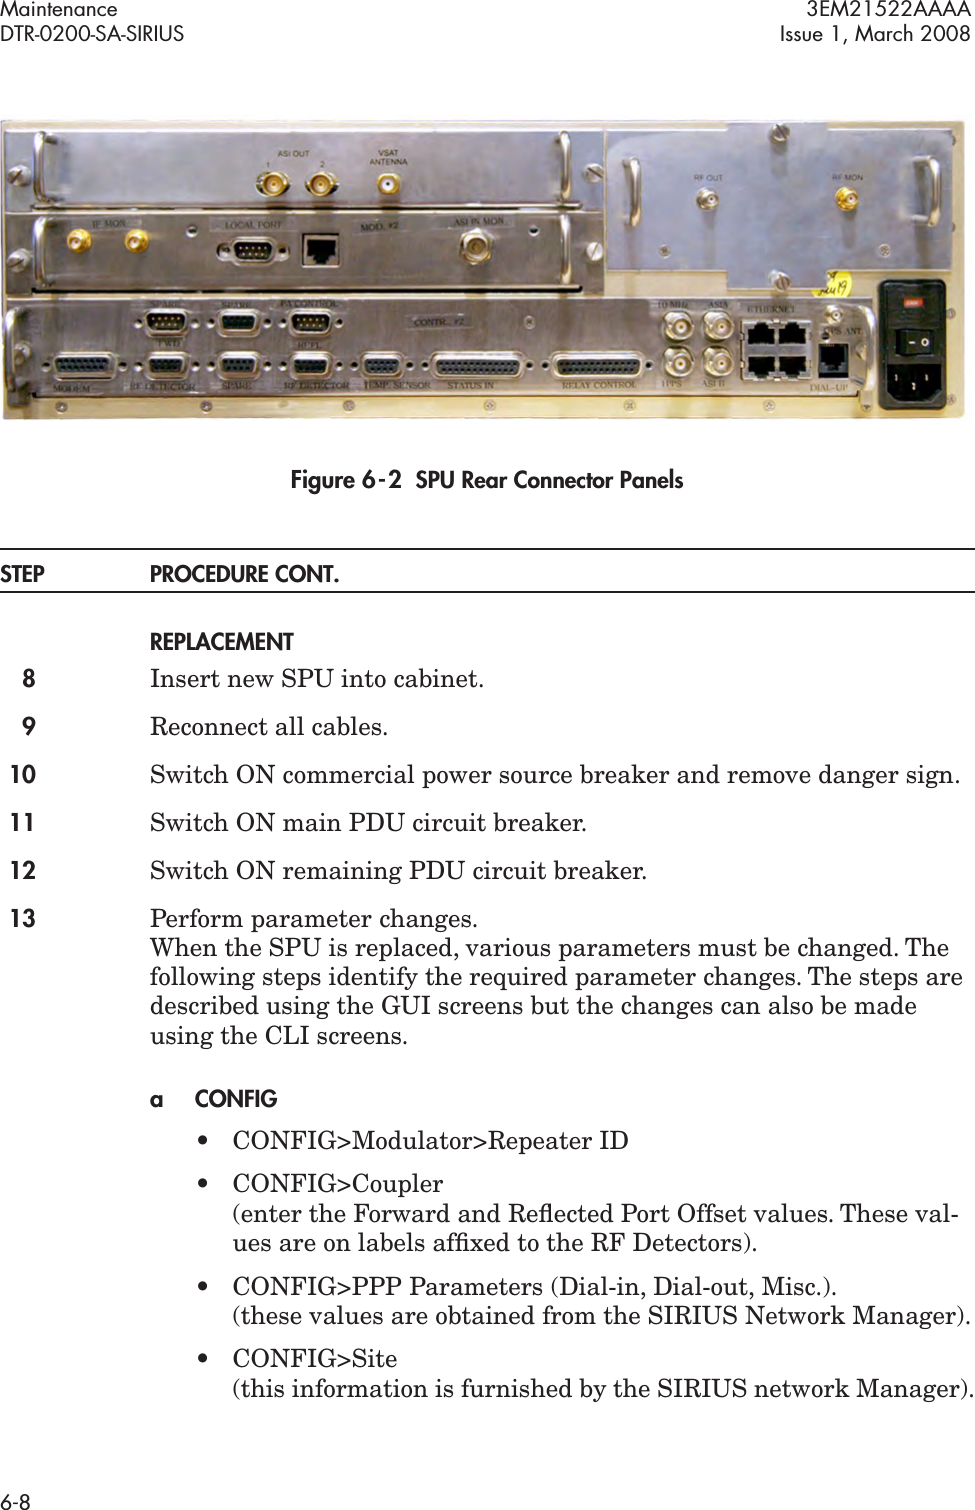 Maintenance 3EM21522AAAADTR-0200-SA-SIRIUS Issue 1, March 20086-8Figure 6  -  2  SPU Rear Connector PanelsSTEP PROCEDURE CONT.REPLACEMENT8Insert new SPU into cabinet.9Reconnect all cables.10 Switch ON commercial power source breaker and remove danger sign.11 Switch ON main PDU circuit breaker.12 Switch ON remaining PDU circuit breaker.13 Perform parameter changes.  When the SPU is replaced, various parameters must be changed. The following steps identify the required parameter changes. The steps are described using the GUI screens but the changes can also be made using the CLI screens.aCONFIG• CONFIG&gt;Modulator&gt;Repeater ID • CONFIG&gt;Coupler  (enter the Forward and Reﬂected Port Offset values. These val-ues are on labels afﬁxed to the RF Detectors).• CONFIG&gt;PPP Parameters (Dial-in, Dial-out, Misc.). (these values are obtained from the SIRIUS Network Manager).• CONFIG&gt;Site (this information is furnished by the SIRIUS network Manager).